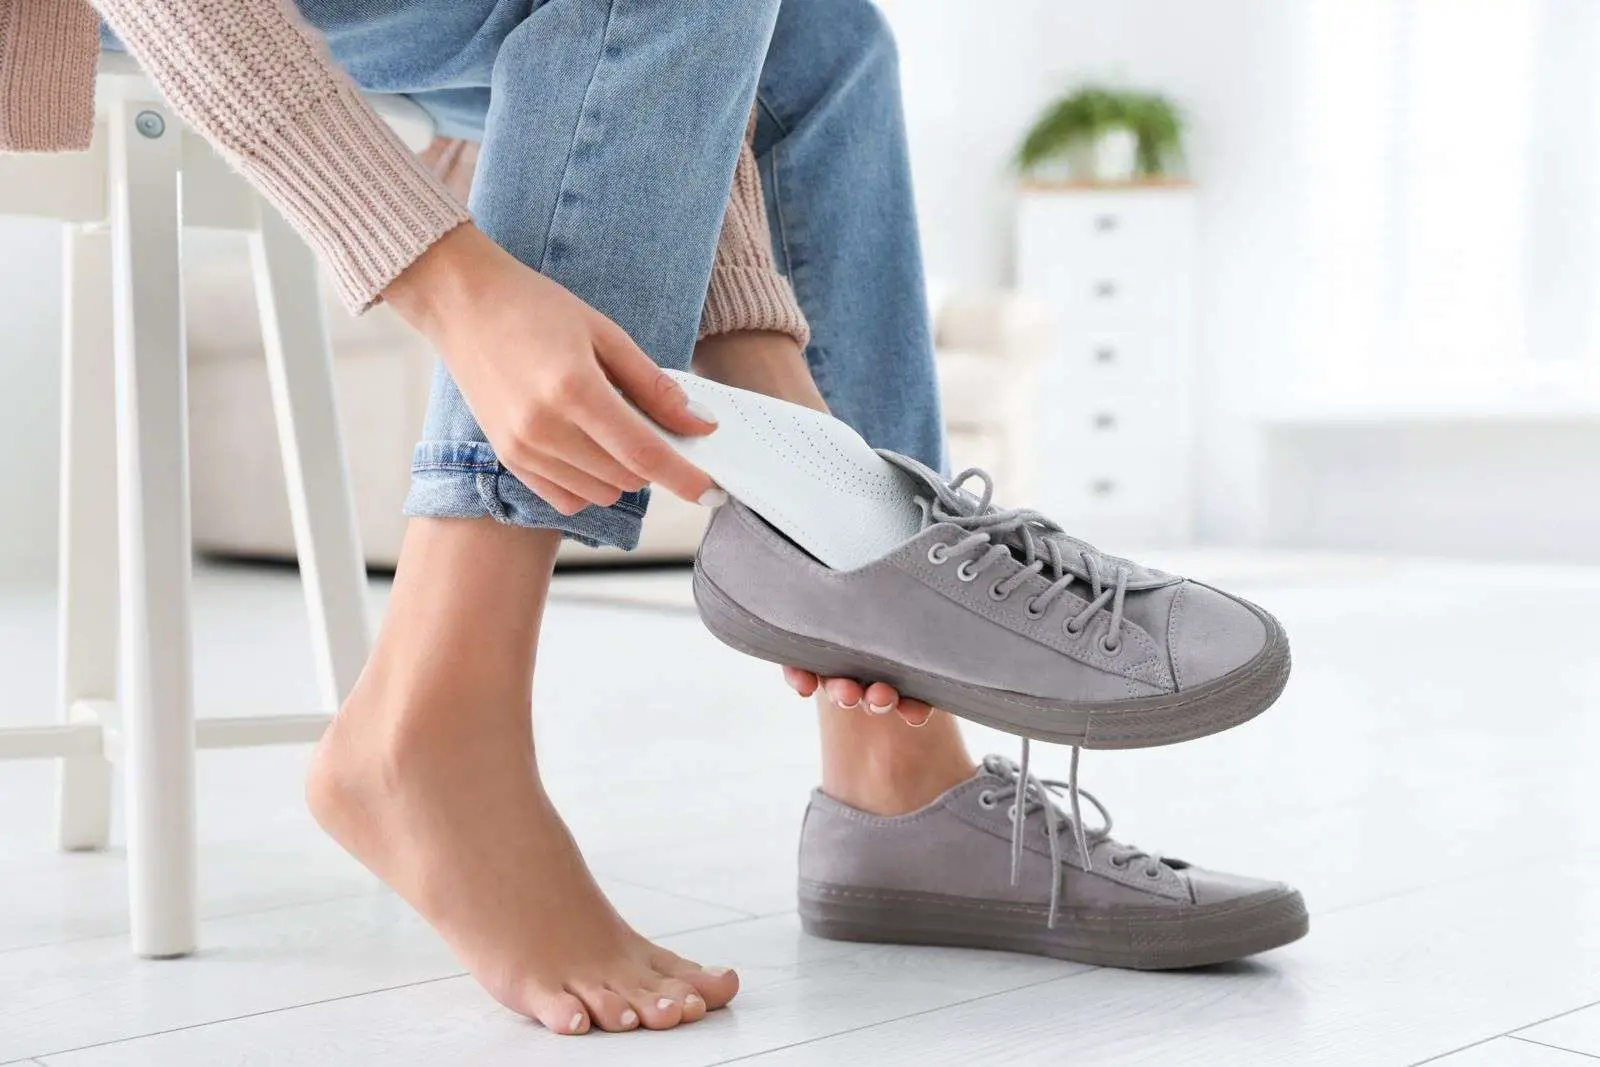 How Custom Orthotics Can Help with Diabetic Foot Care